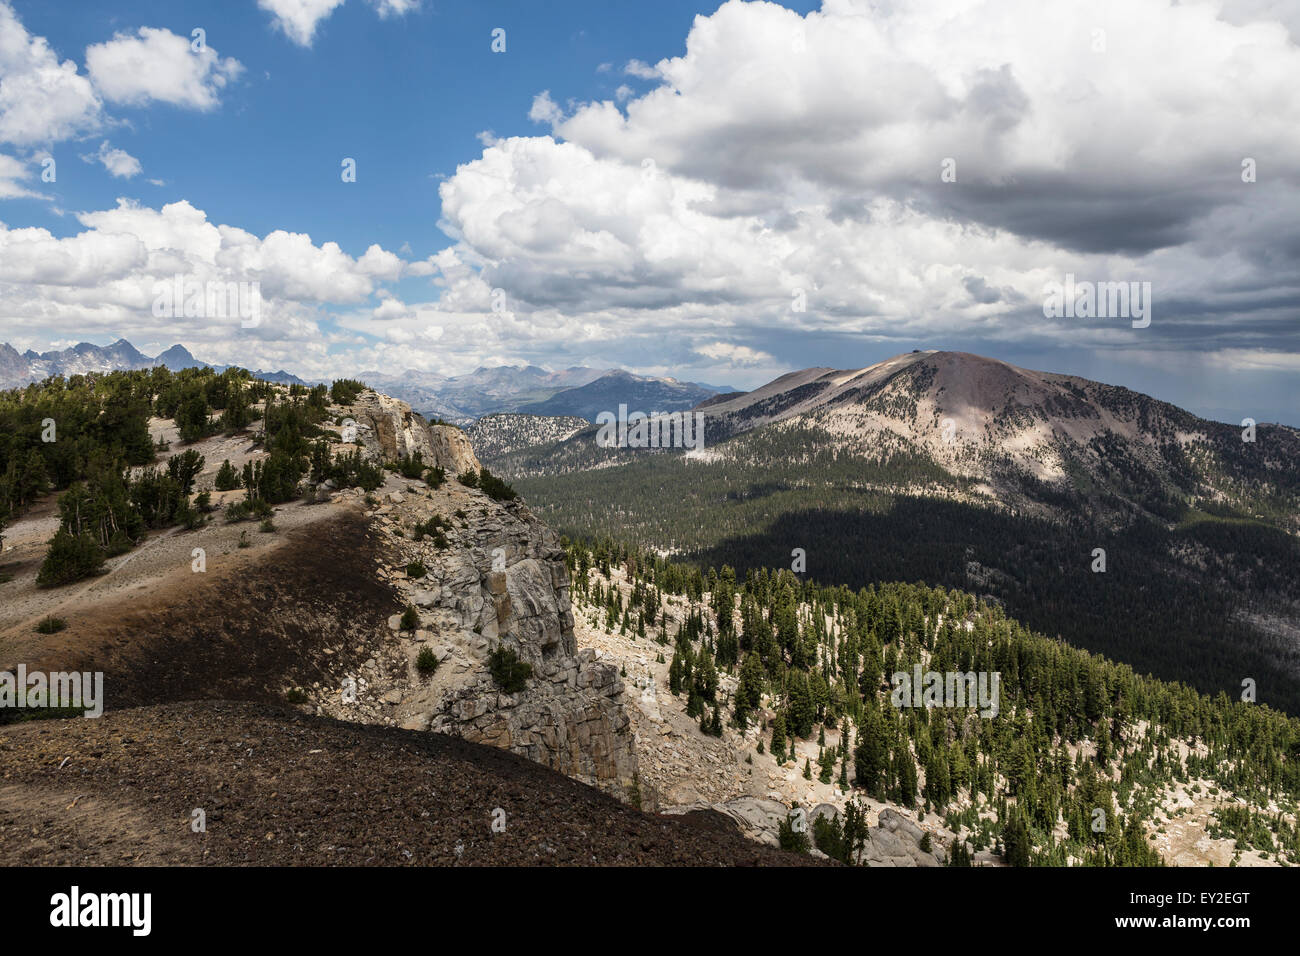 Vue vers le mammouth de Mammoth Mountain Crest Trail in California's Sierra Nevada. Banque D'Images